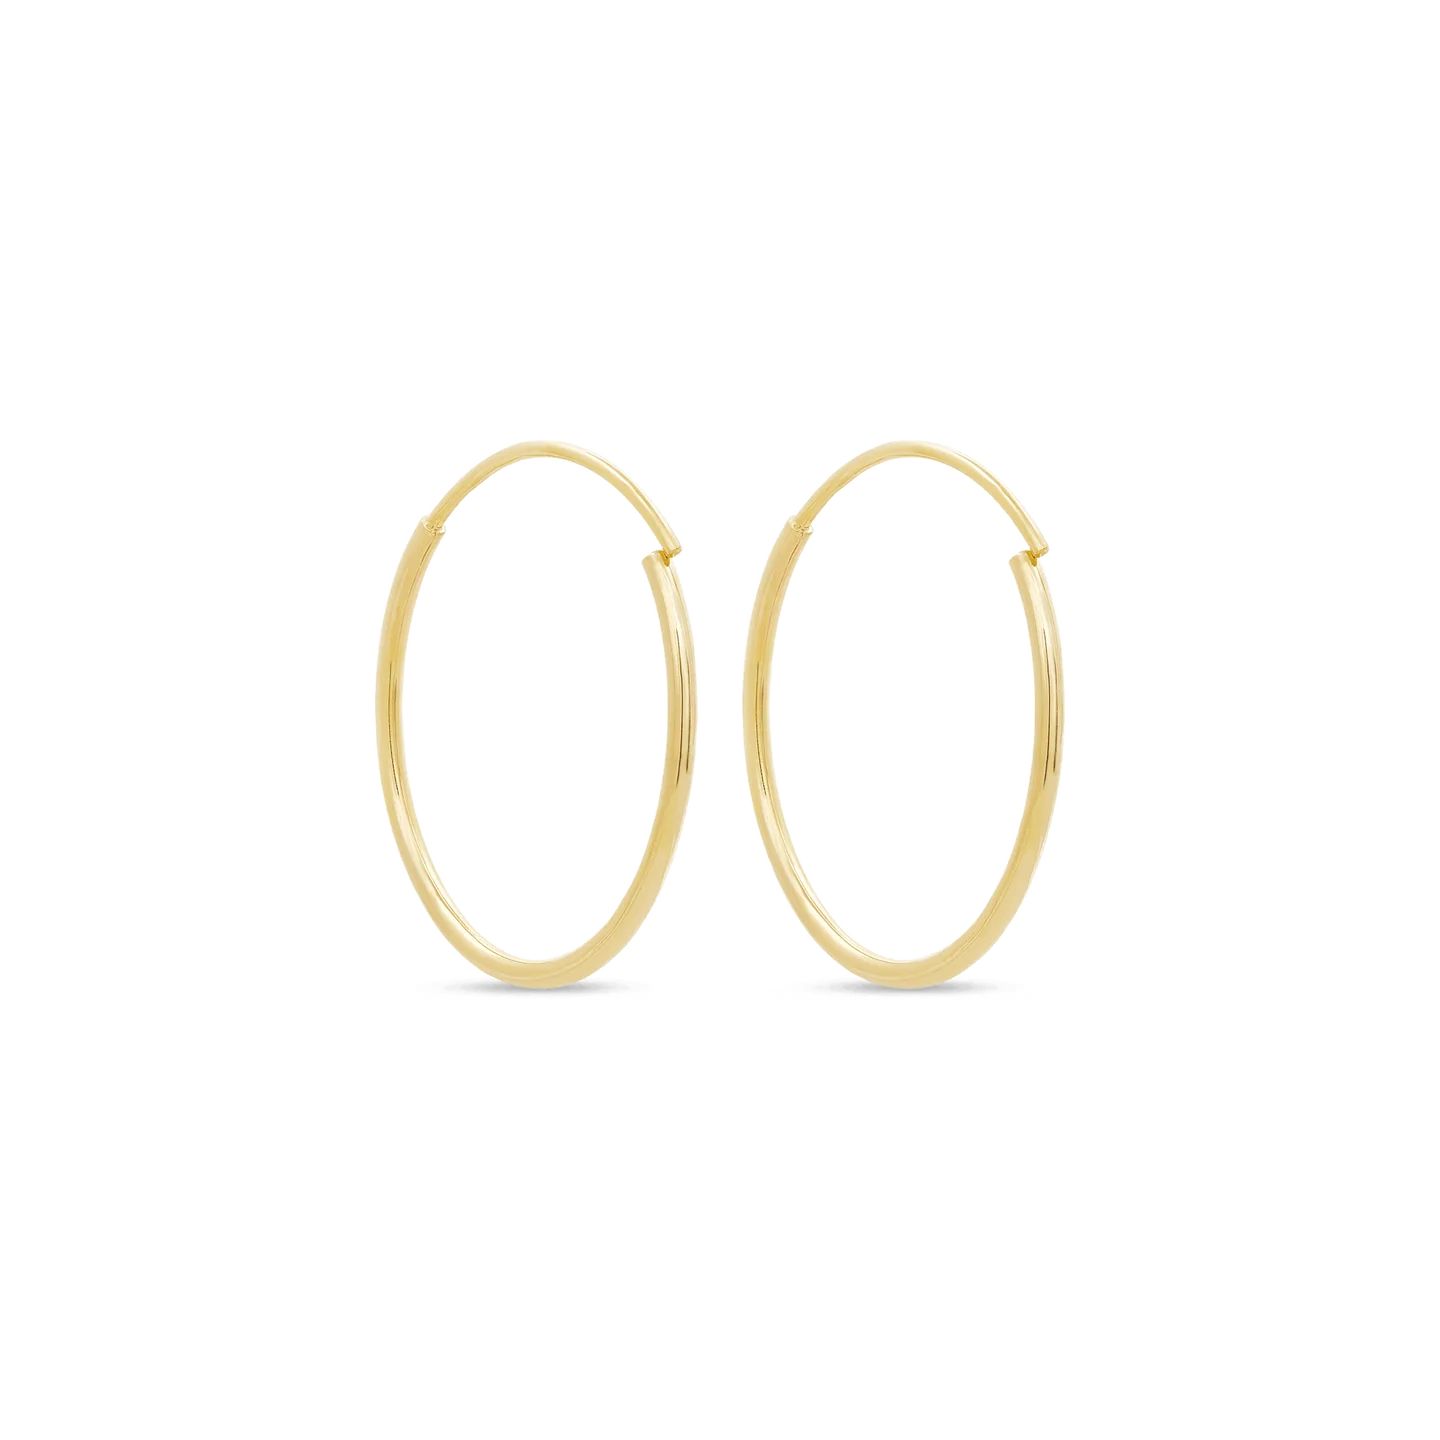 Small Round Endless Hoop Earrings | Stone & Strand